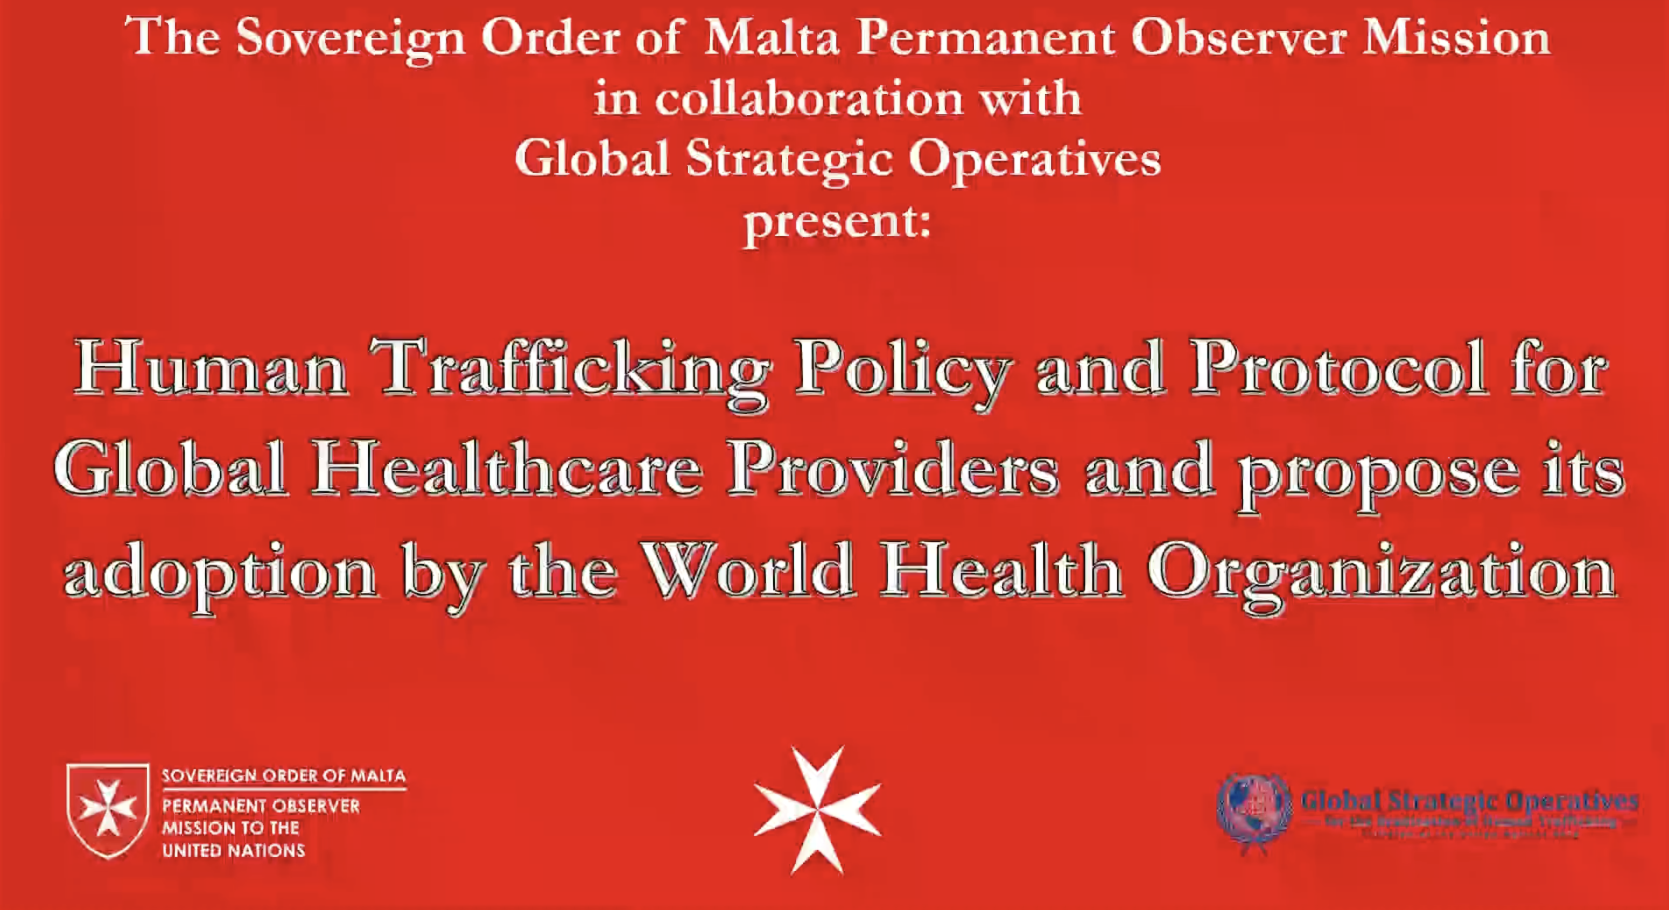 Launch of the Human Trafficking Policy and Protocol for Global Healthcare Providers – The Sovereign Order of Malta Permanent Observer Mission & Global Strategic Operatives / Thursday 29th September / United Nations Headquarters